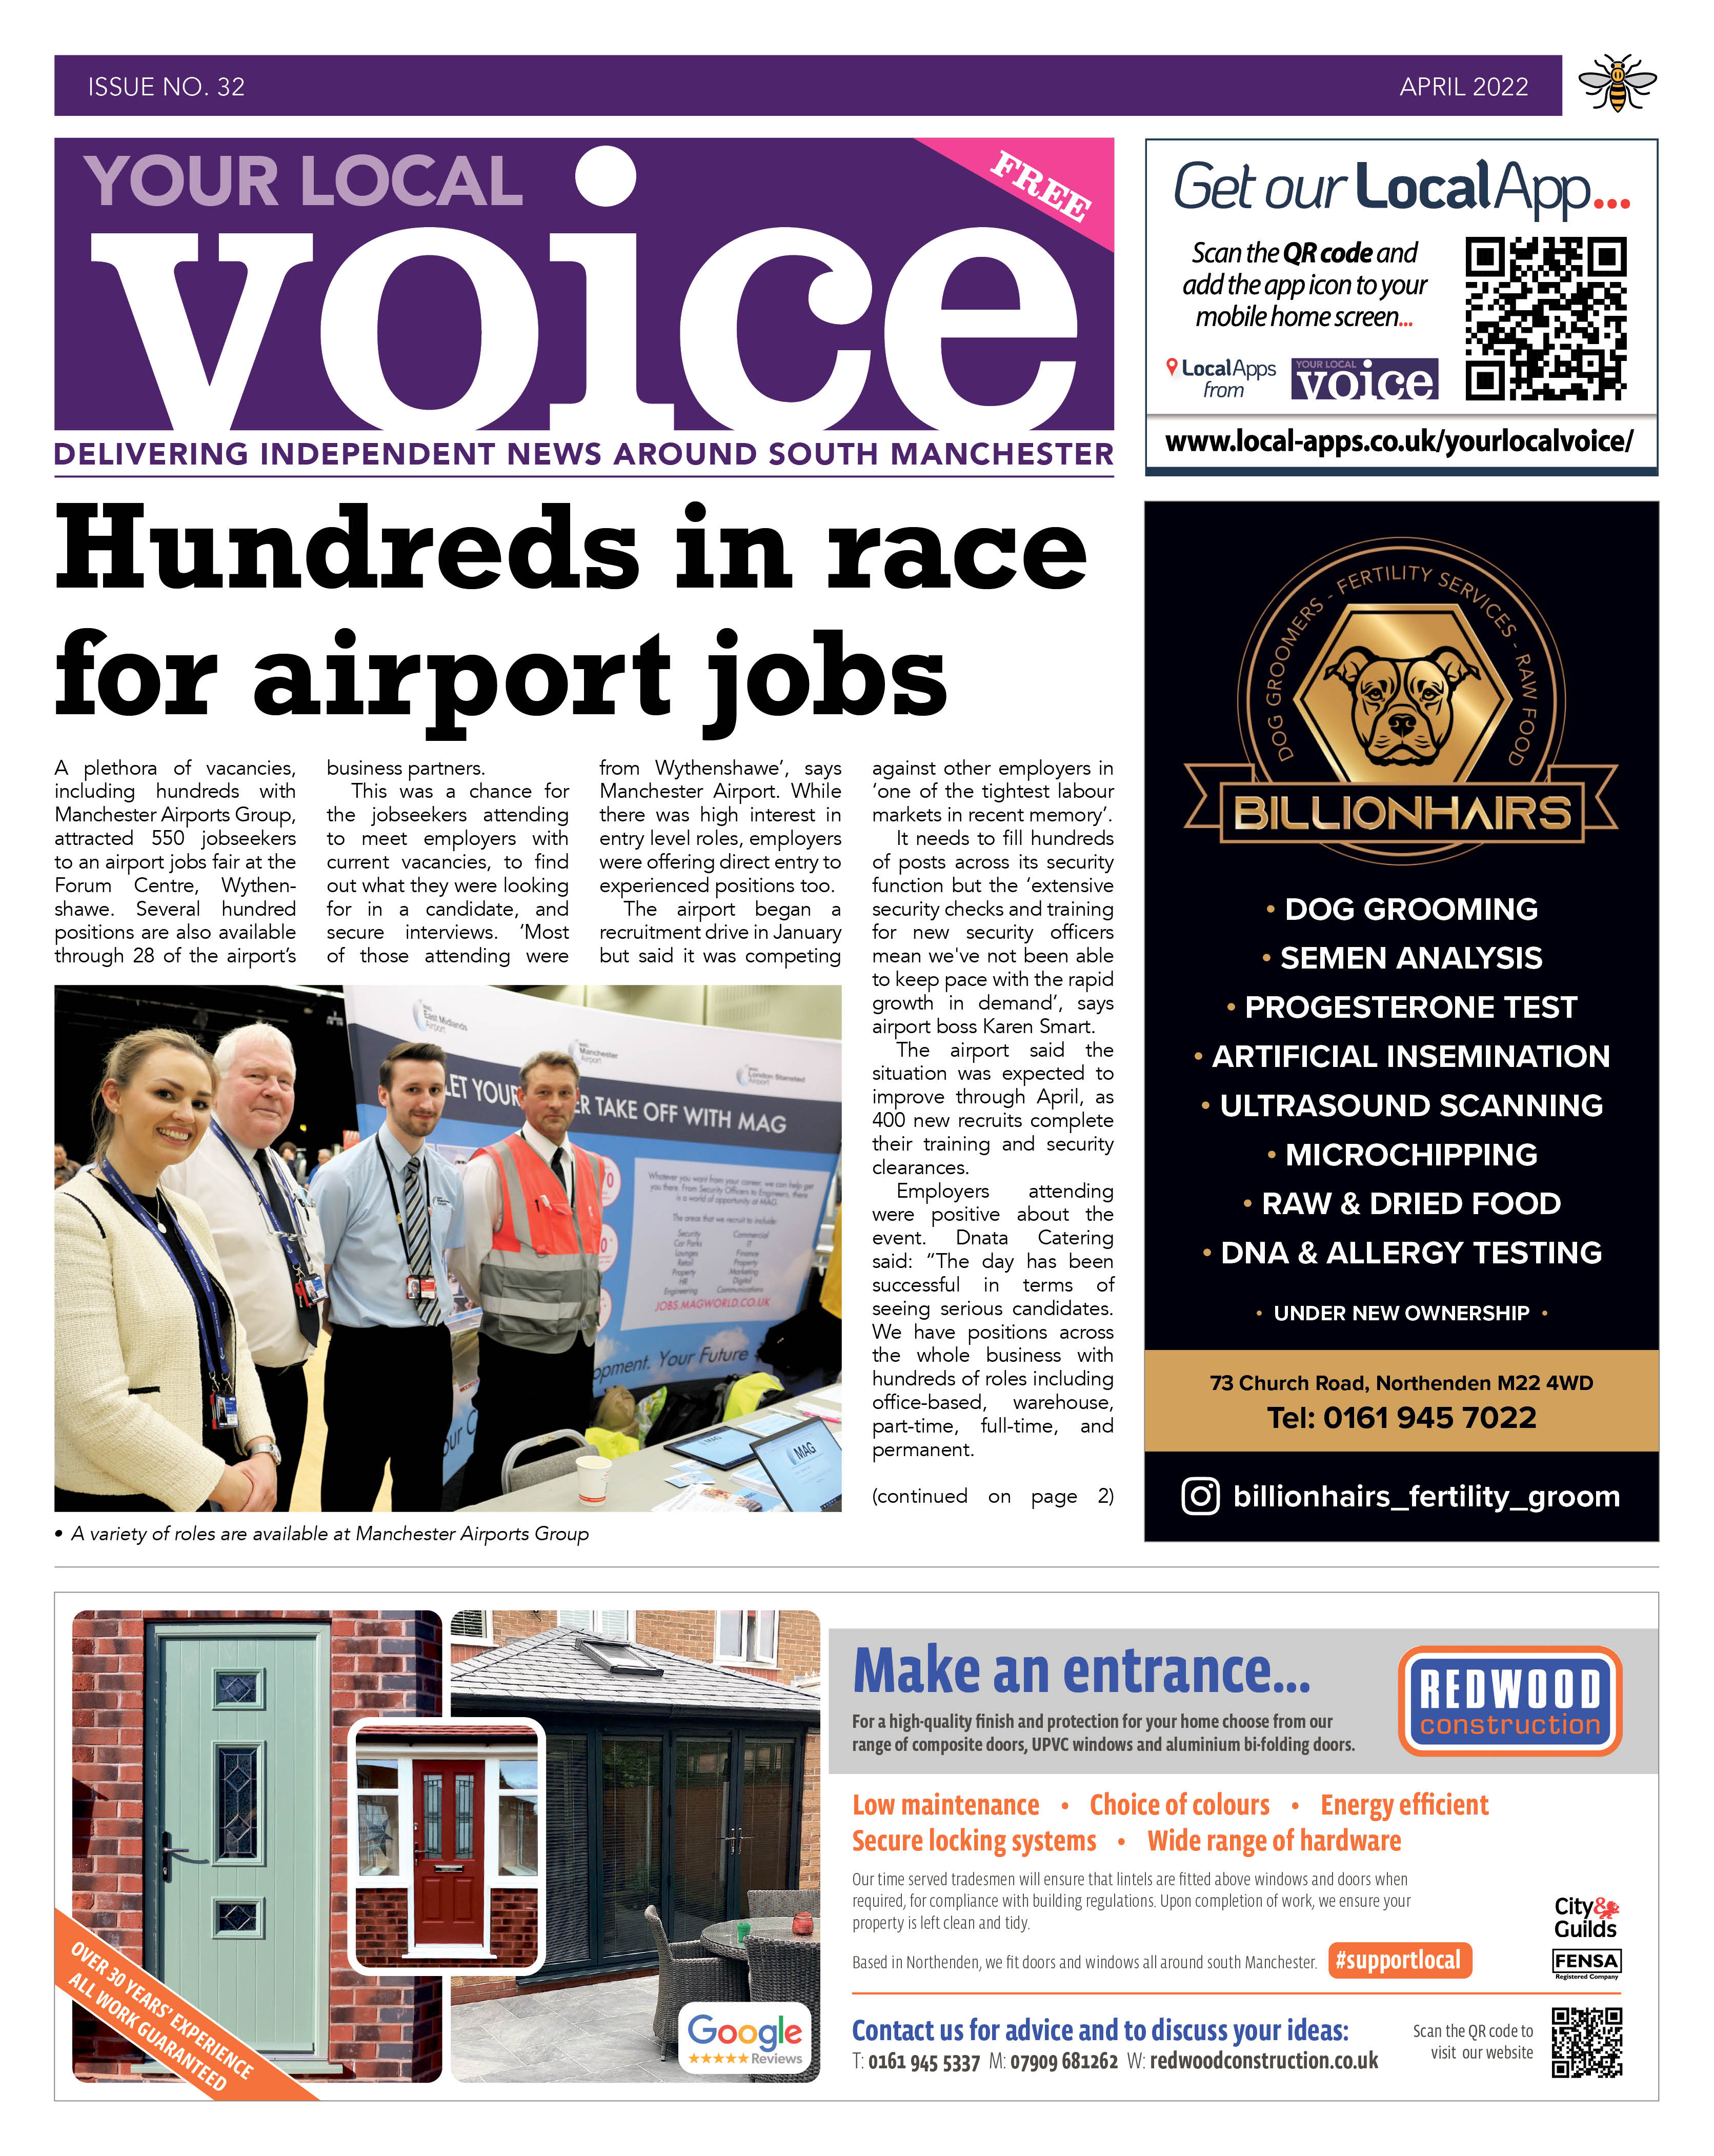 Your Local Voice newspaper issue 32